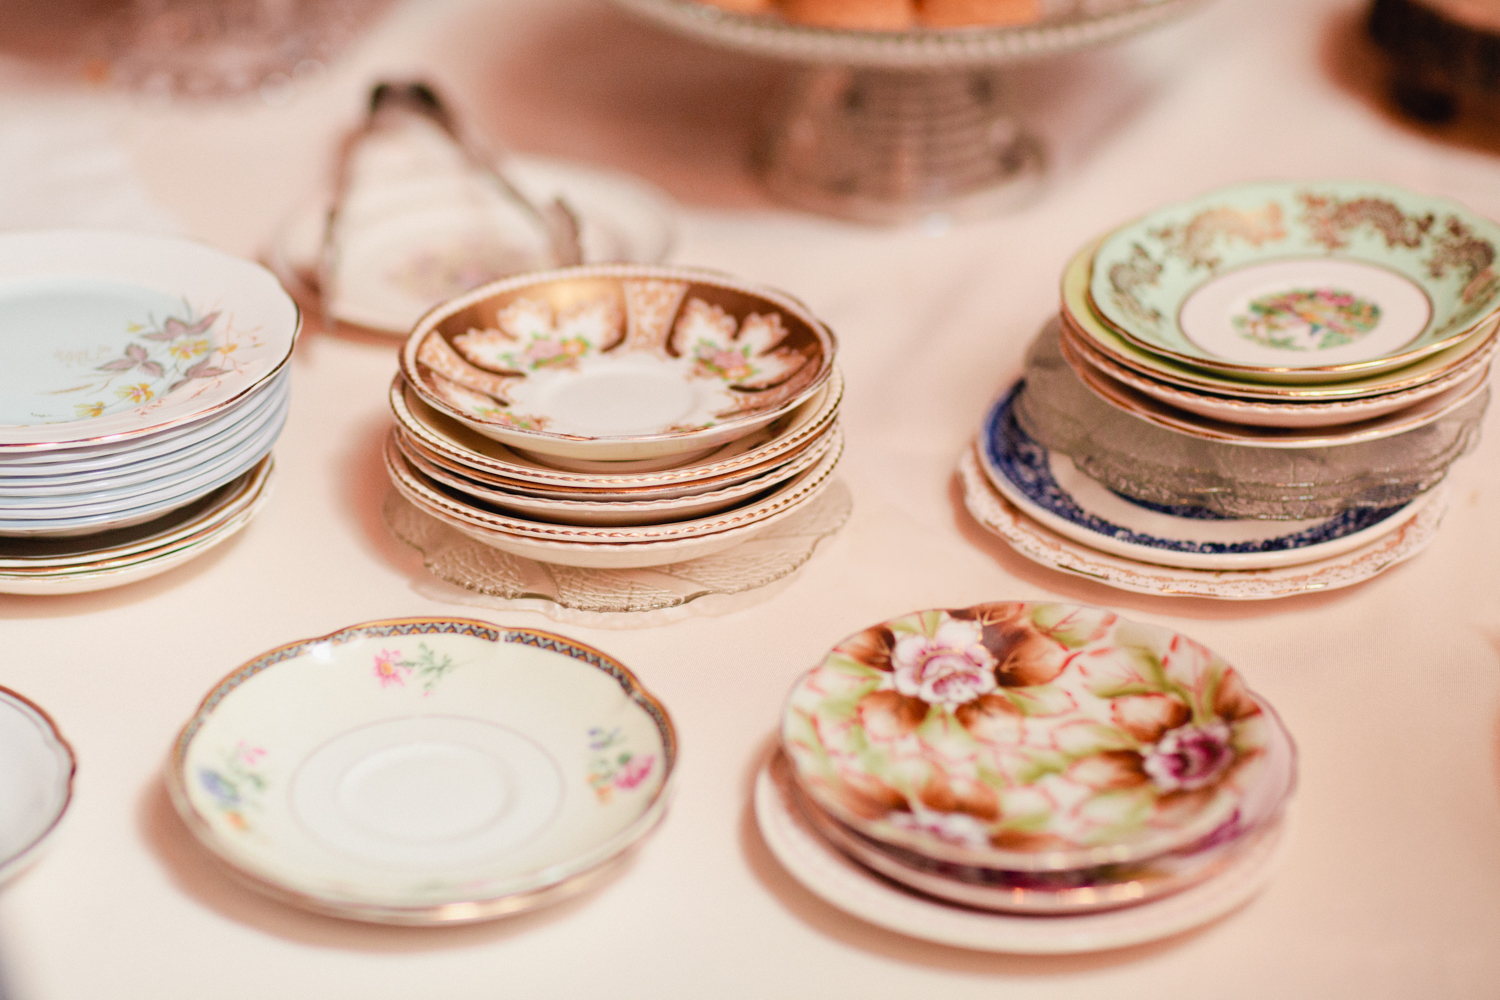 Saar Bank Farms ~ Vintage plates for sweets!